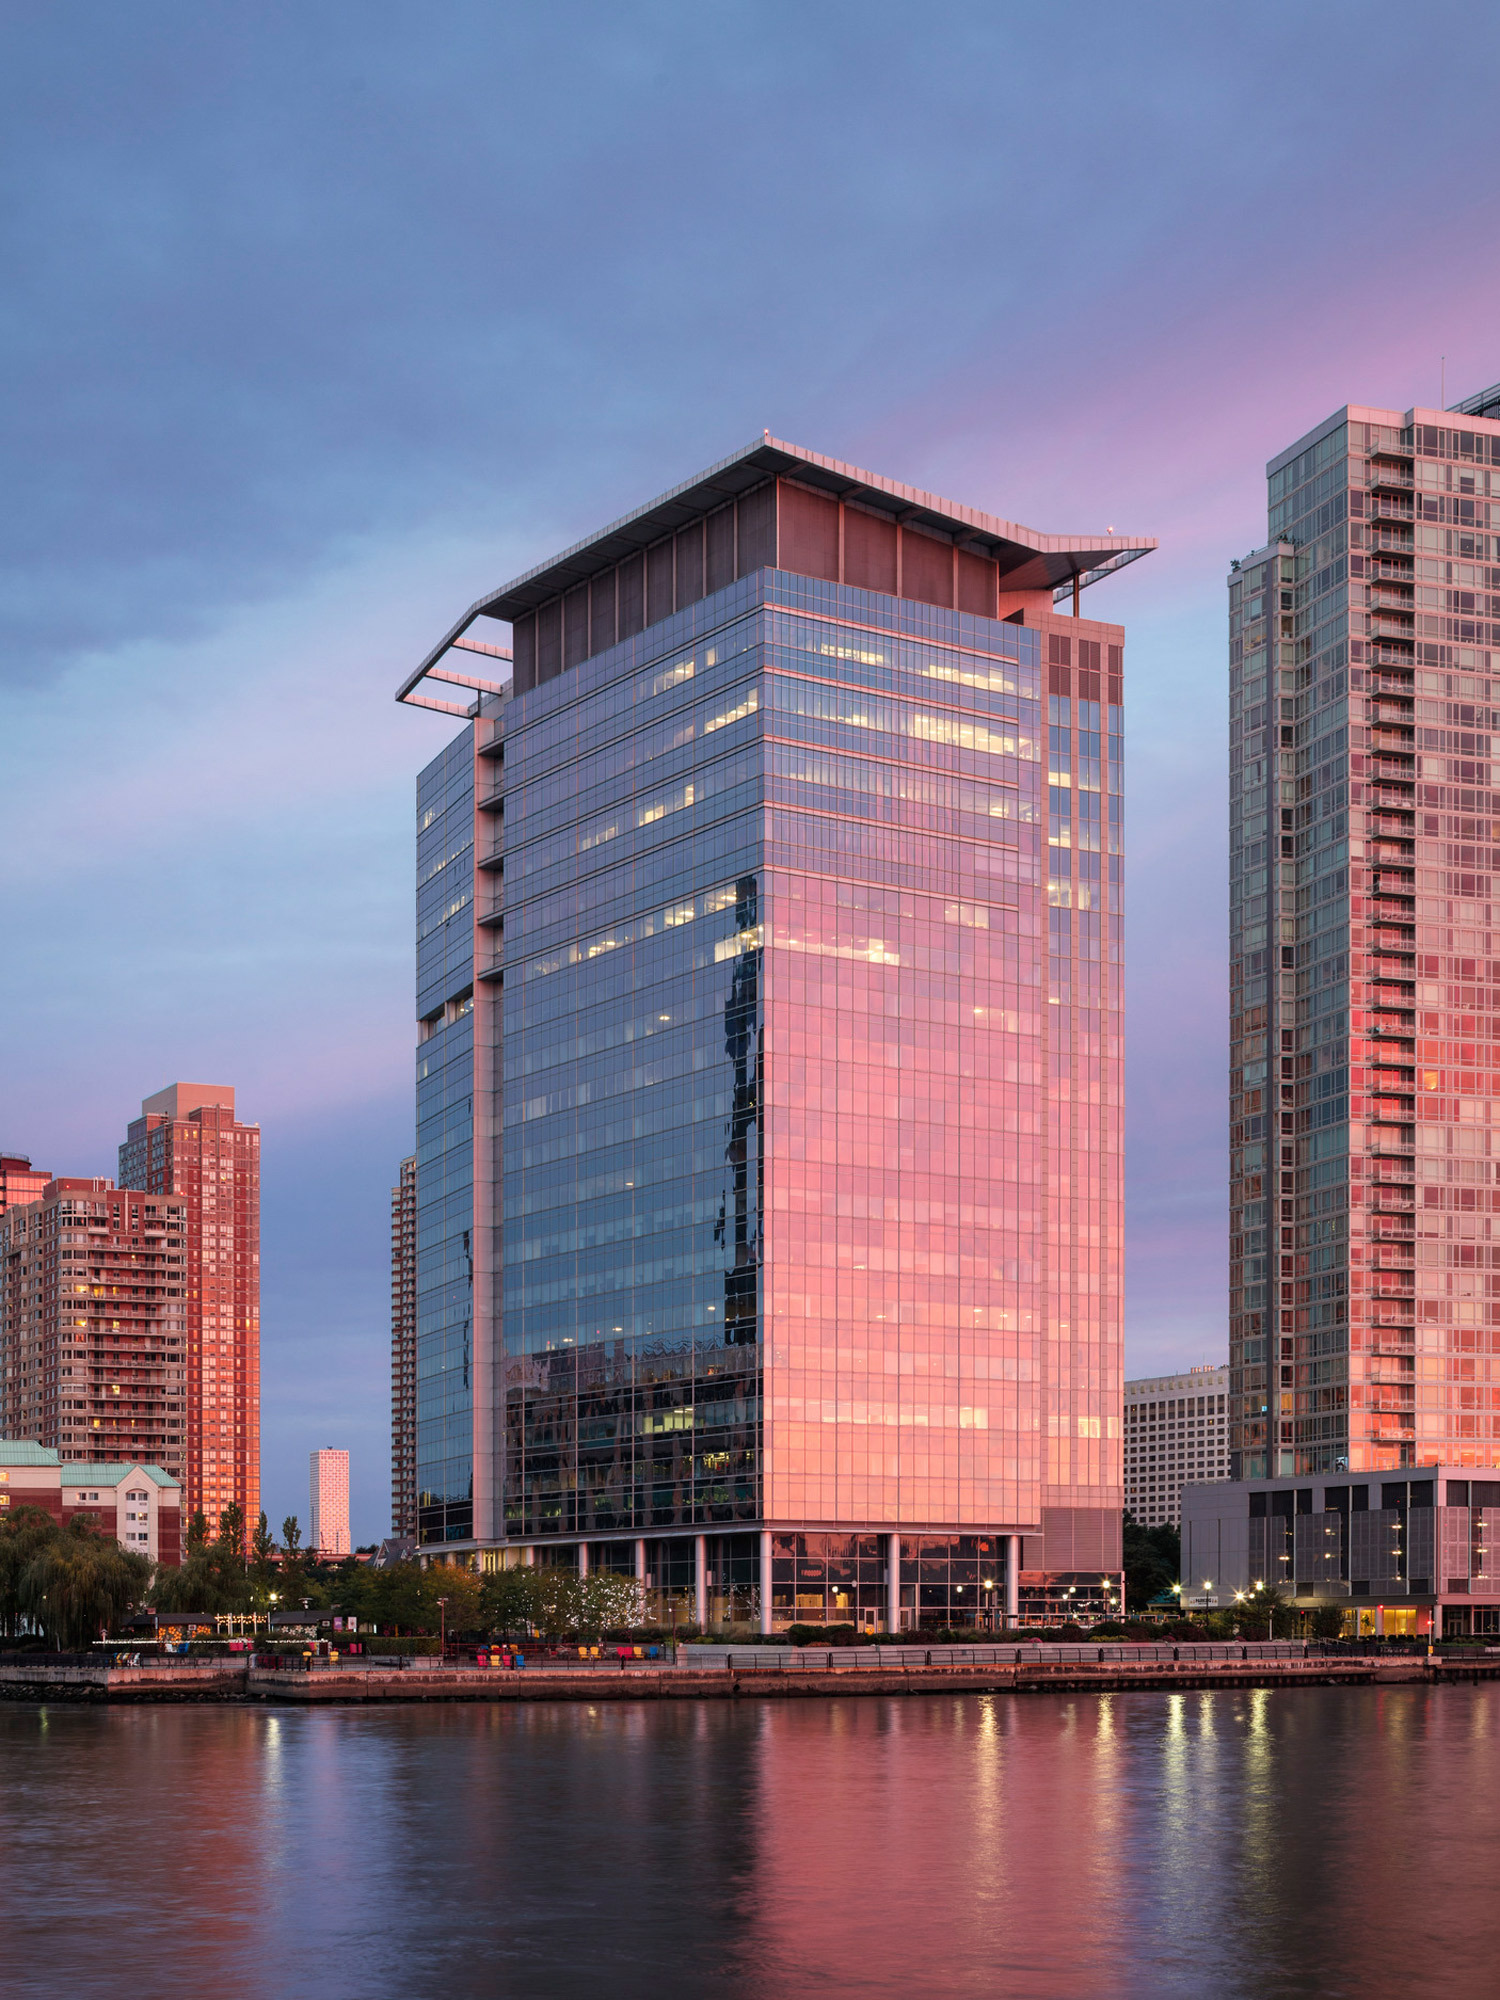 Modern skyscraper with reflective glass facade captures the warm hues of sunset, juxtaposed against a serene river and the soft twilight sky, showcasing contemporary architectural design in an urban waterfront setting.